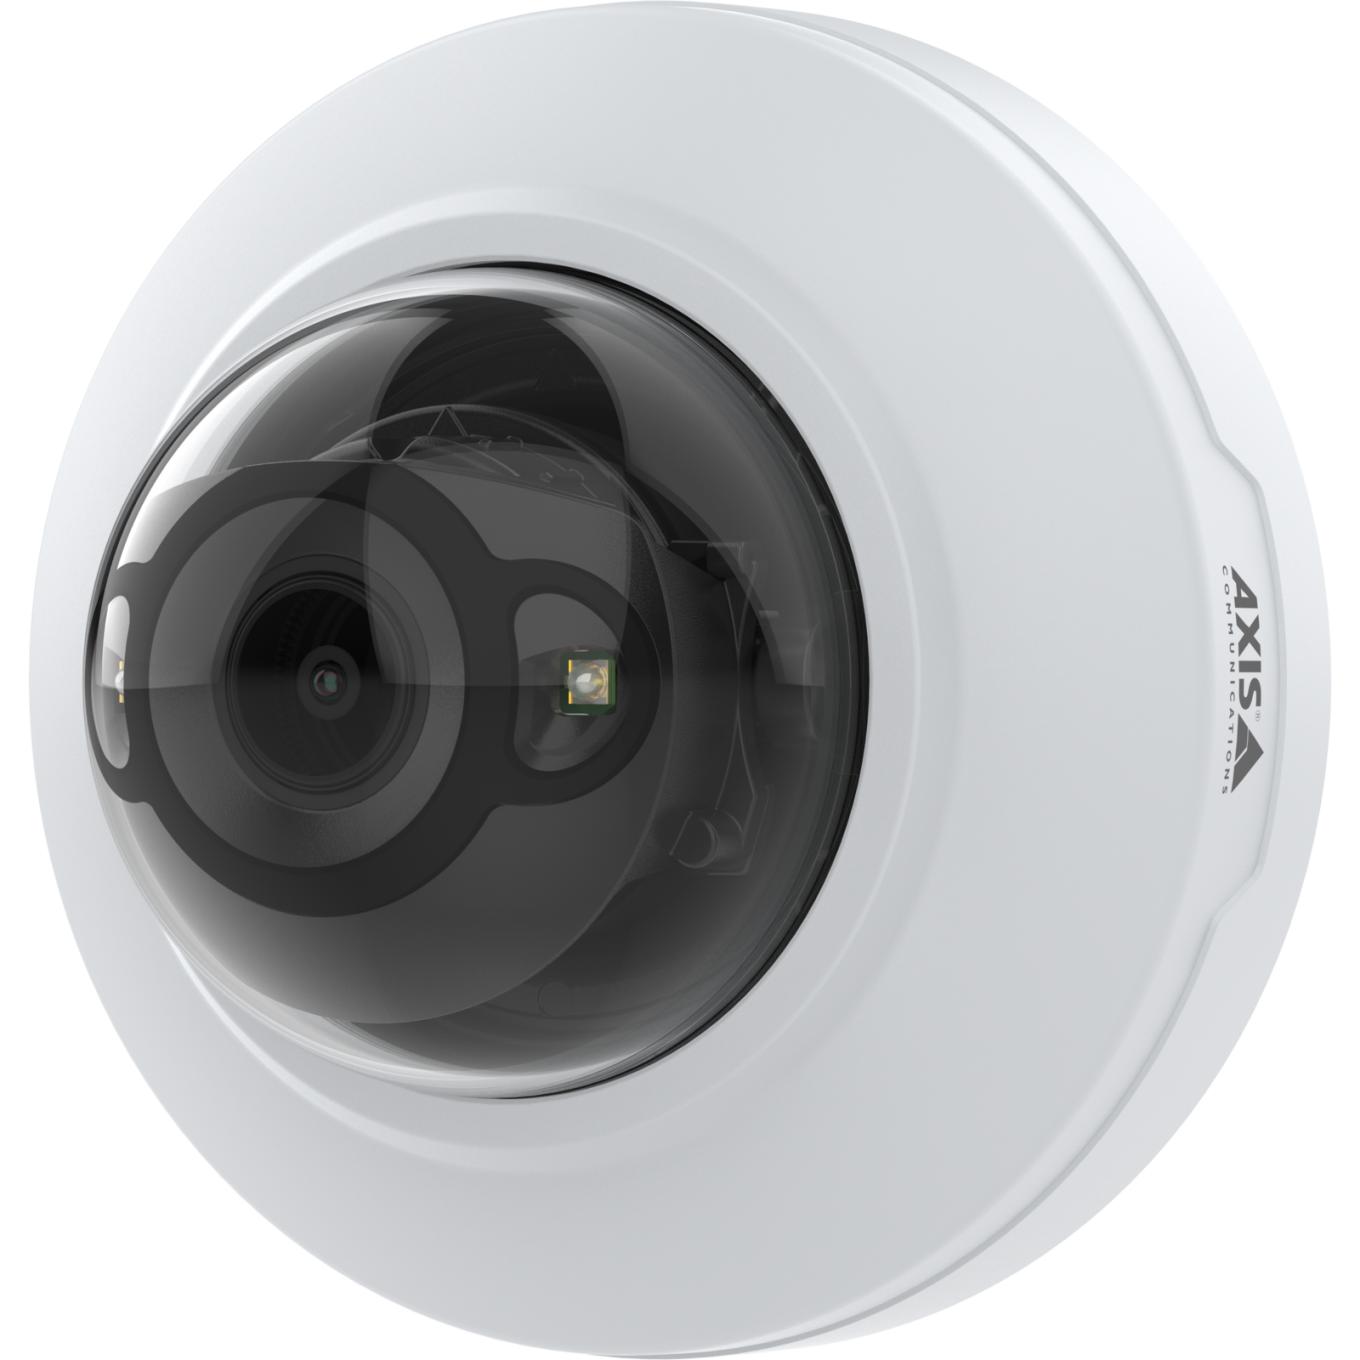 AXIS M4216-LV Dome Camera | Axis Communications